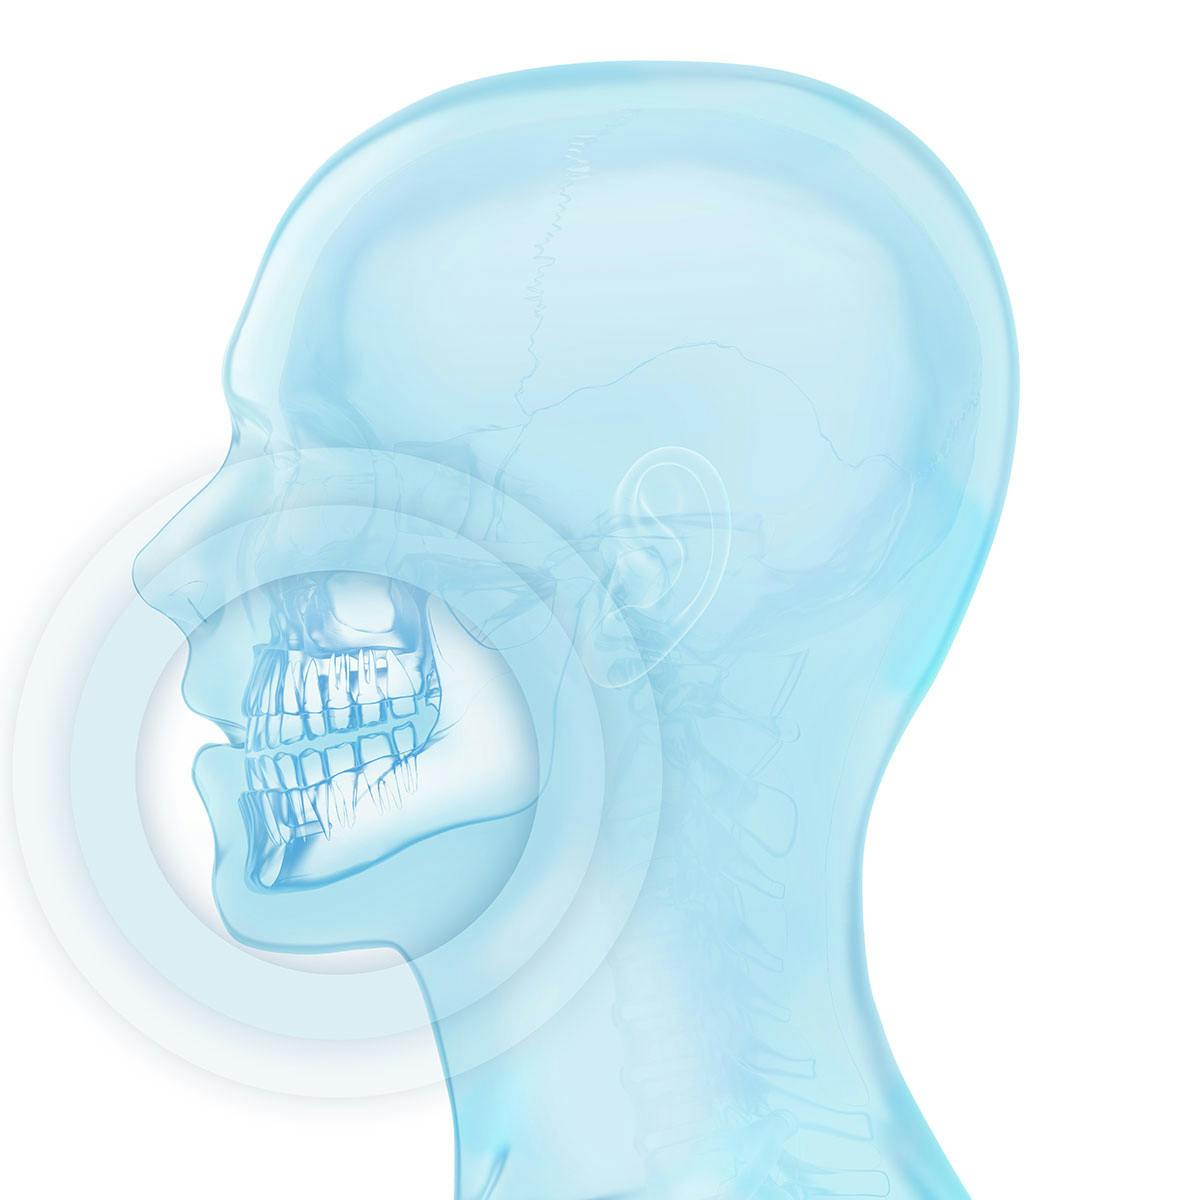 Illustration:side view of a human head showing x-ray style detail of teeth